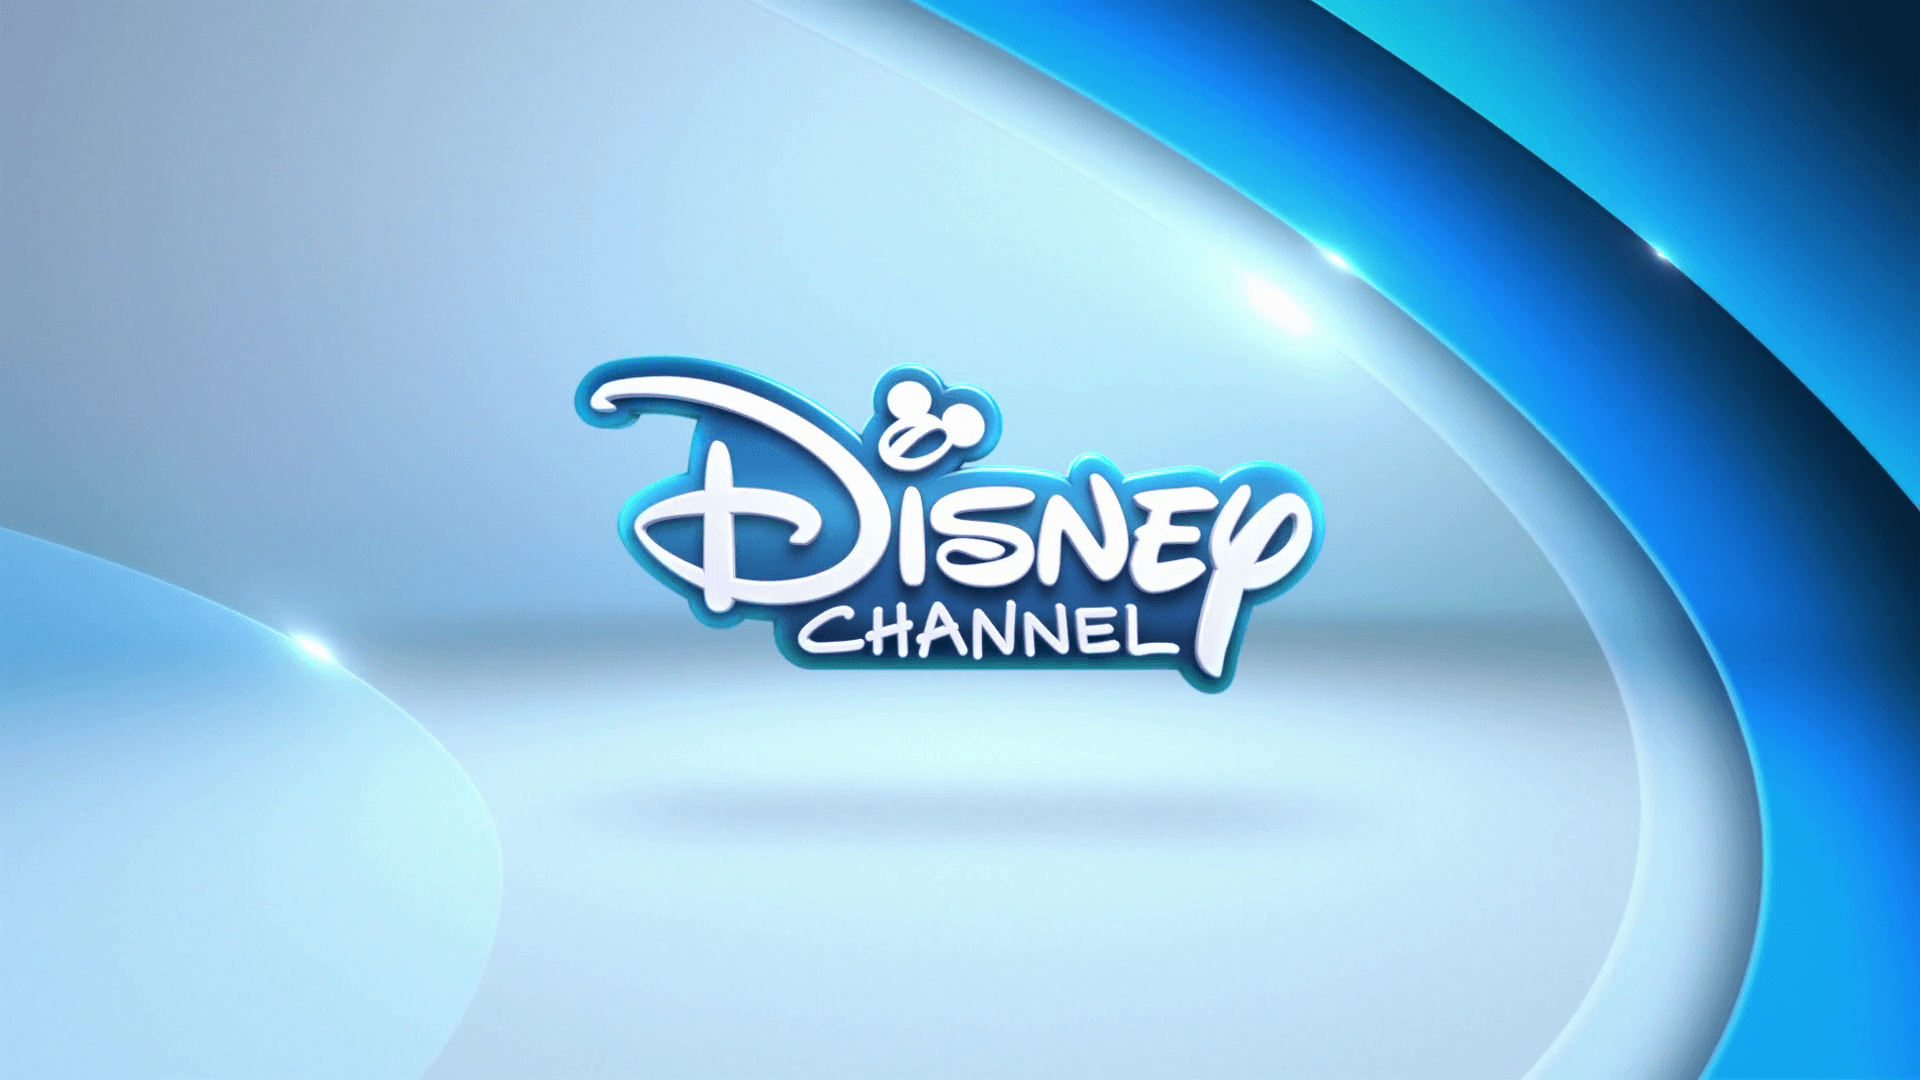 2015 Disney Channel Logo - Disney Channel is Ready for Summer! - LaughingPlace.com